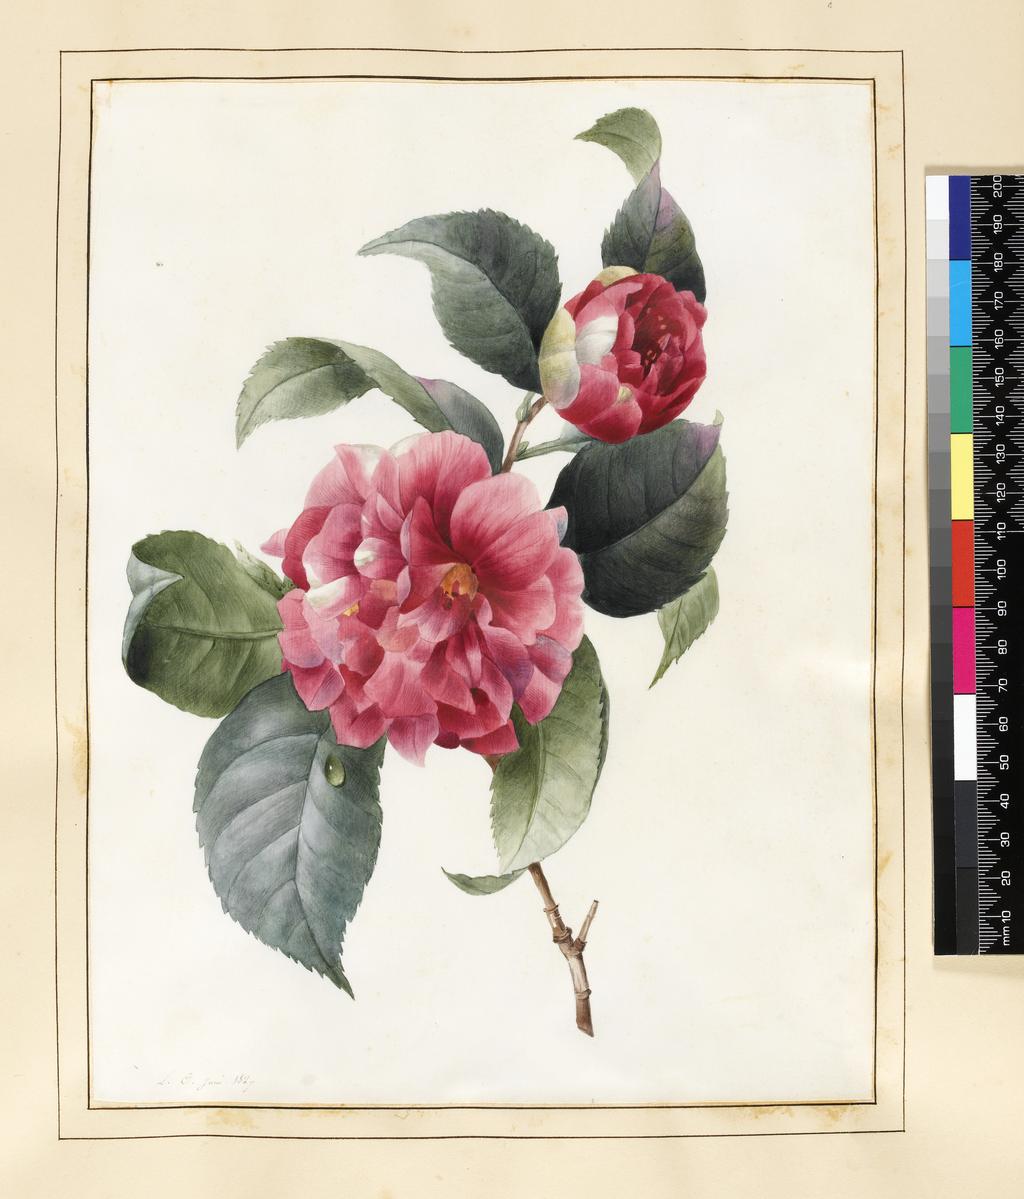 An image of Camellia. Louise d'Orleans (French, 1812-185?). Watercolour with some bodycolour on vellum. Height: 266 mm, width: 205 mm. 1827.